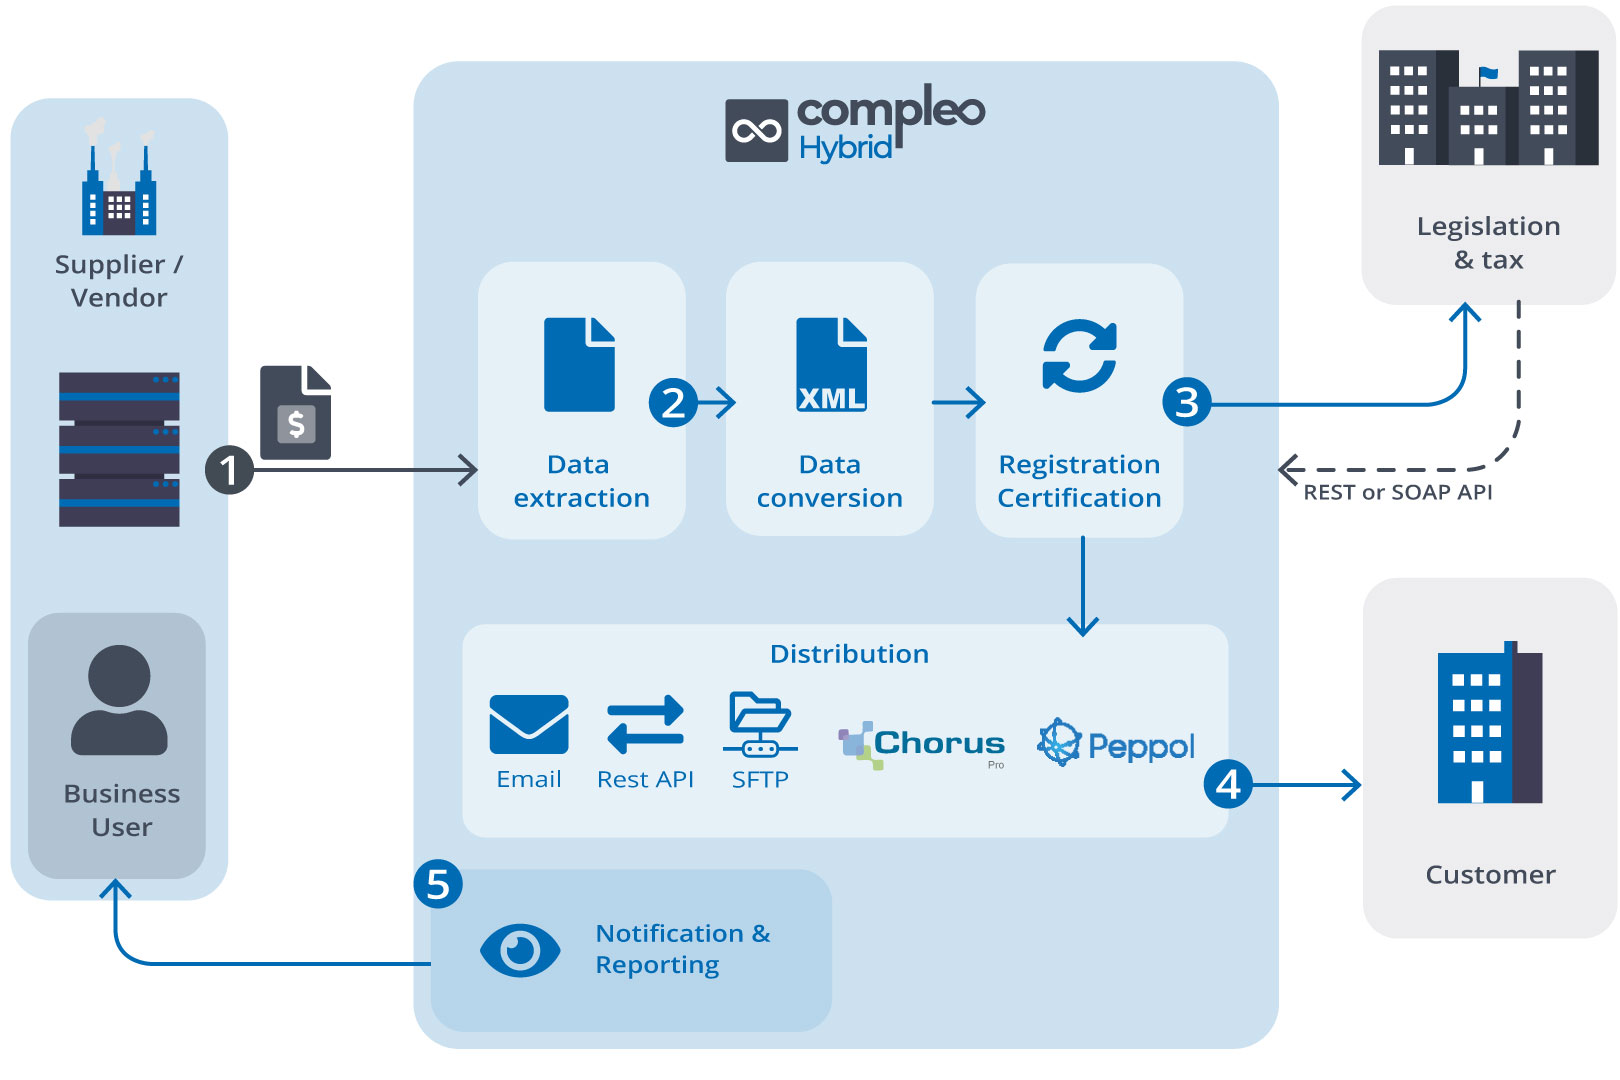 Schema showing the workflow of outbound e-invoicing